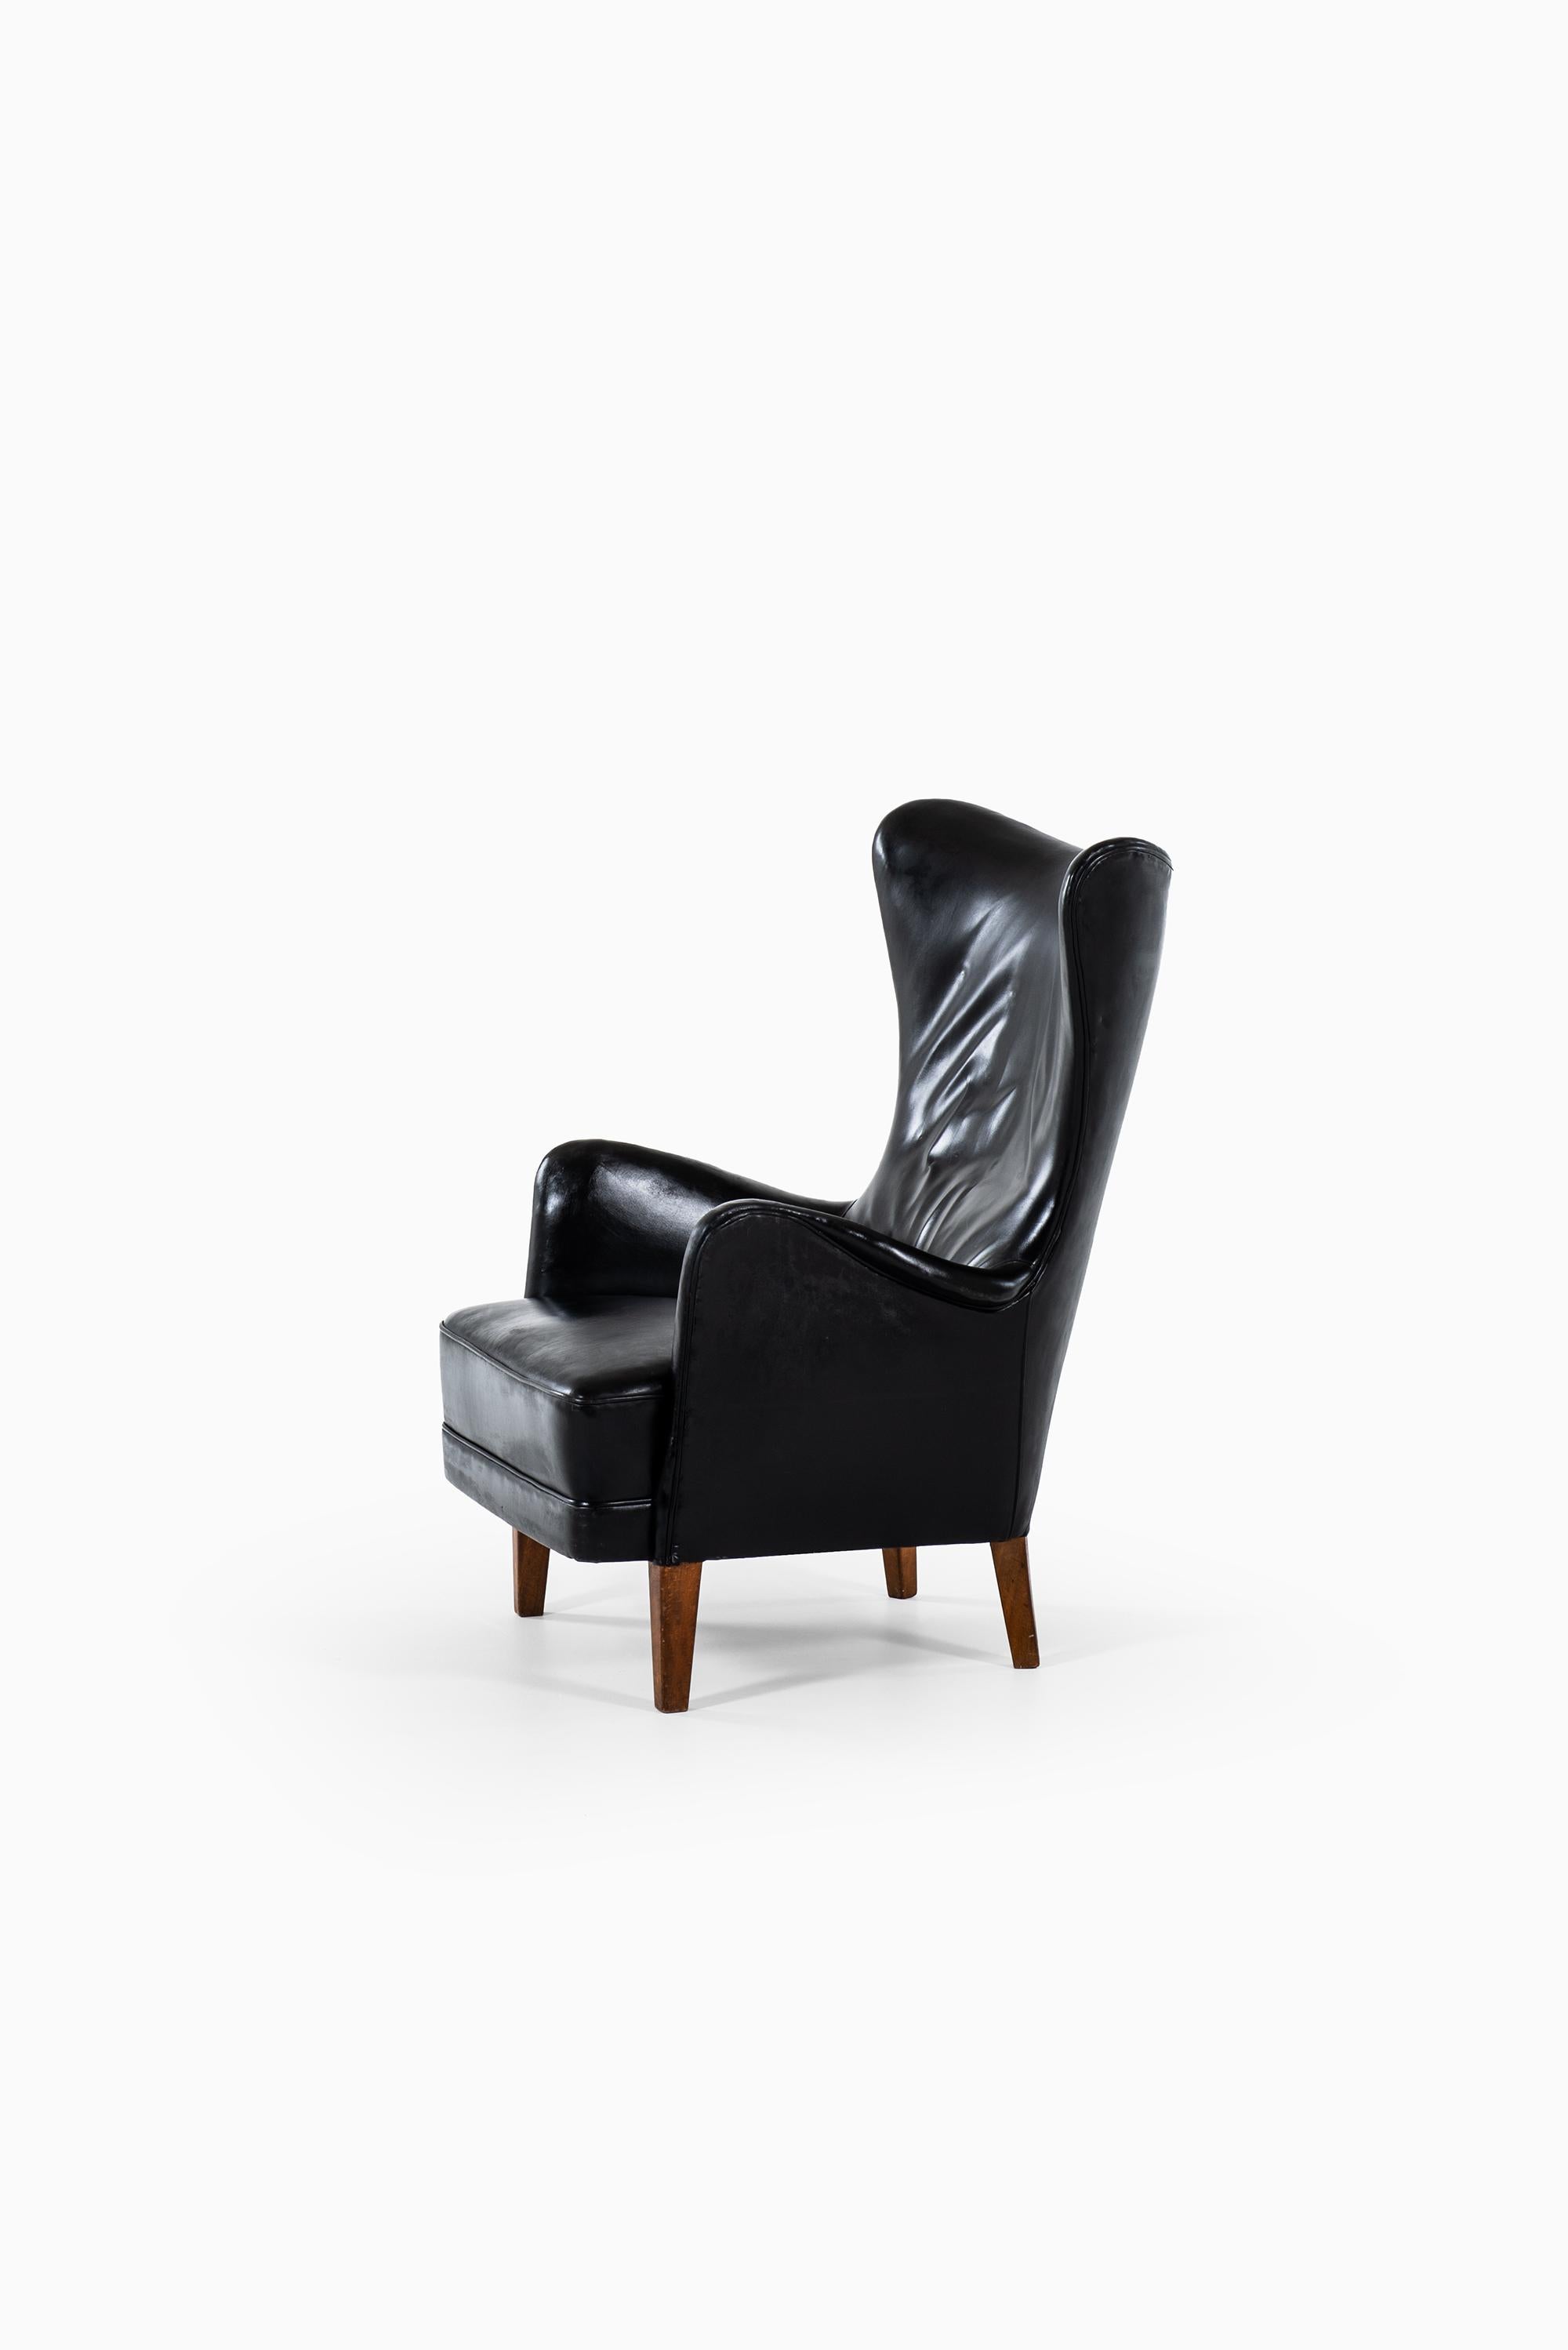 Rare wingback easy chair designed in 1935 by Frits Henningsen. Produced by cabinetmaker Frits Henningsen in Denmark